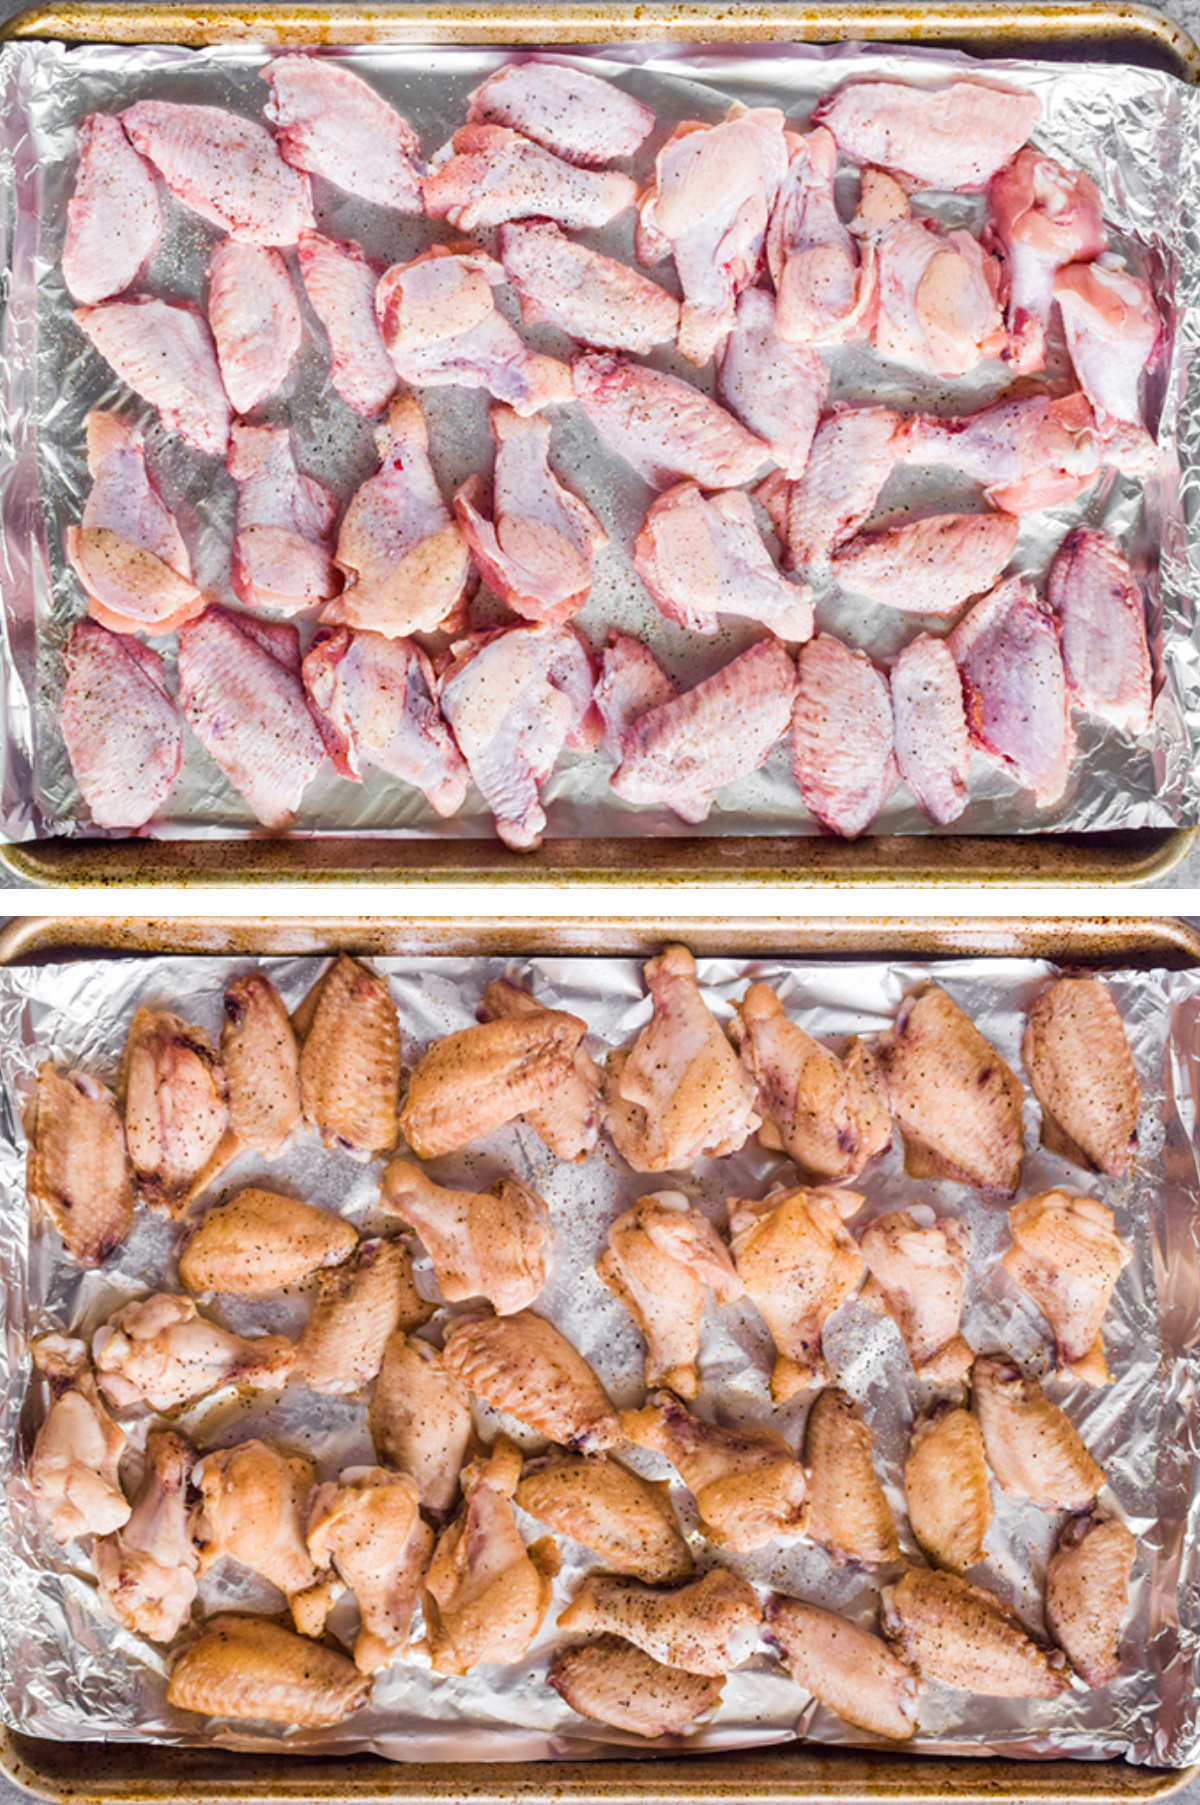 Two overhead images in one: 1. Uncooked chicken wings with salt and pepper on a baking sheet. 2. Baked chicken wings on baking sheet. 